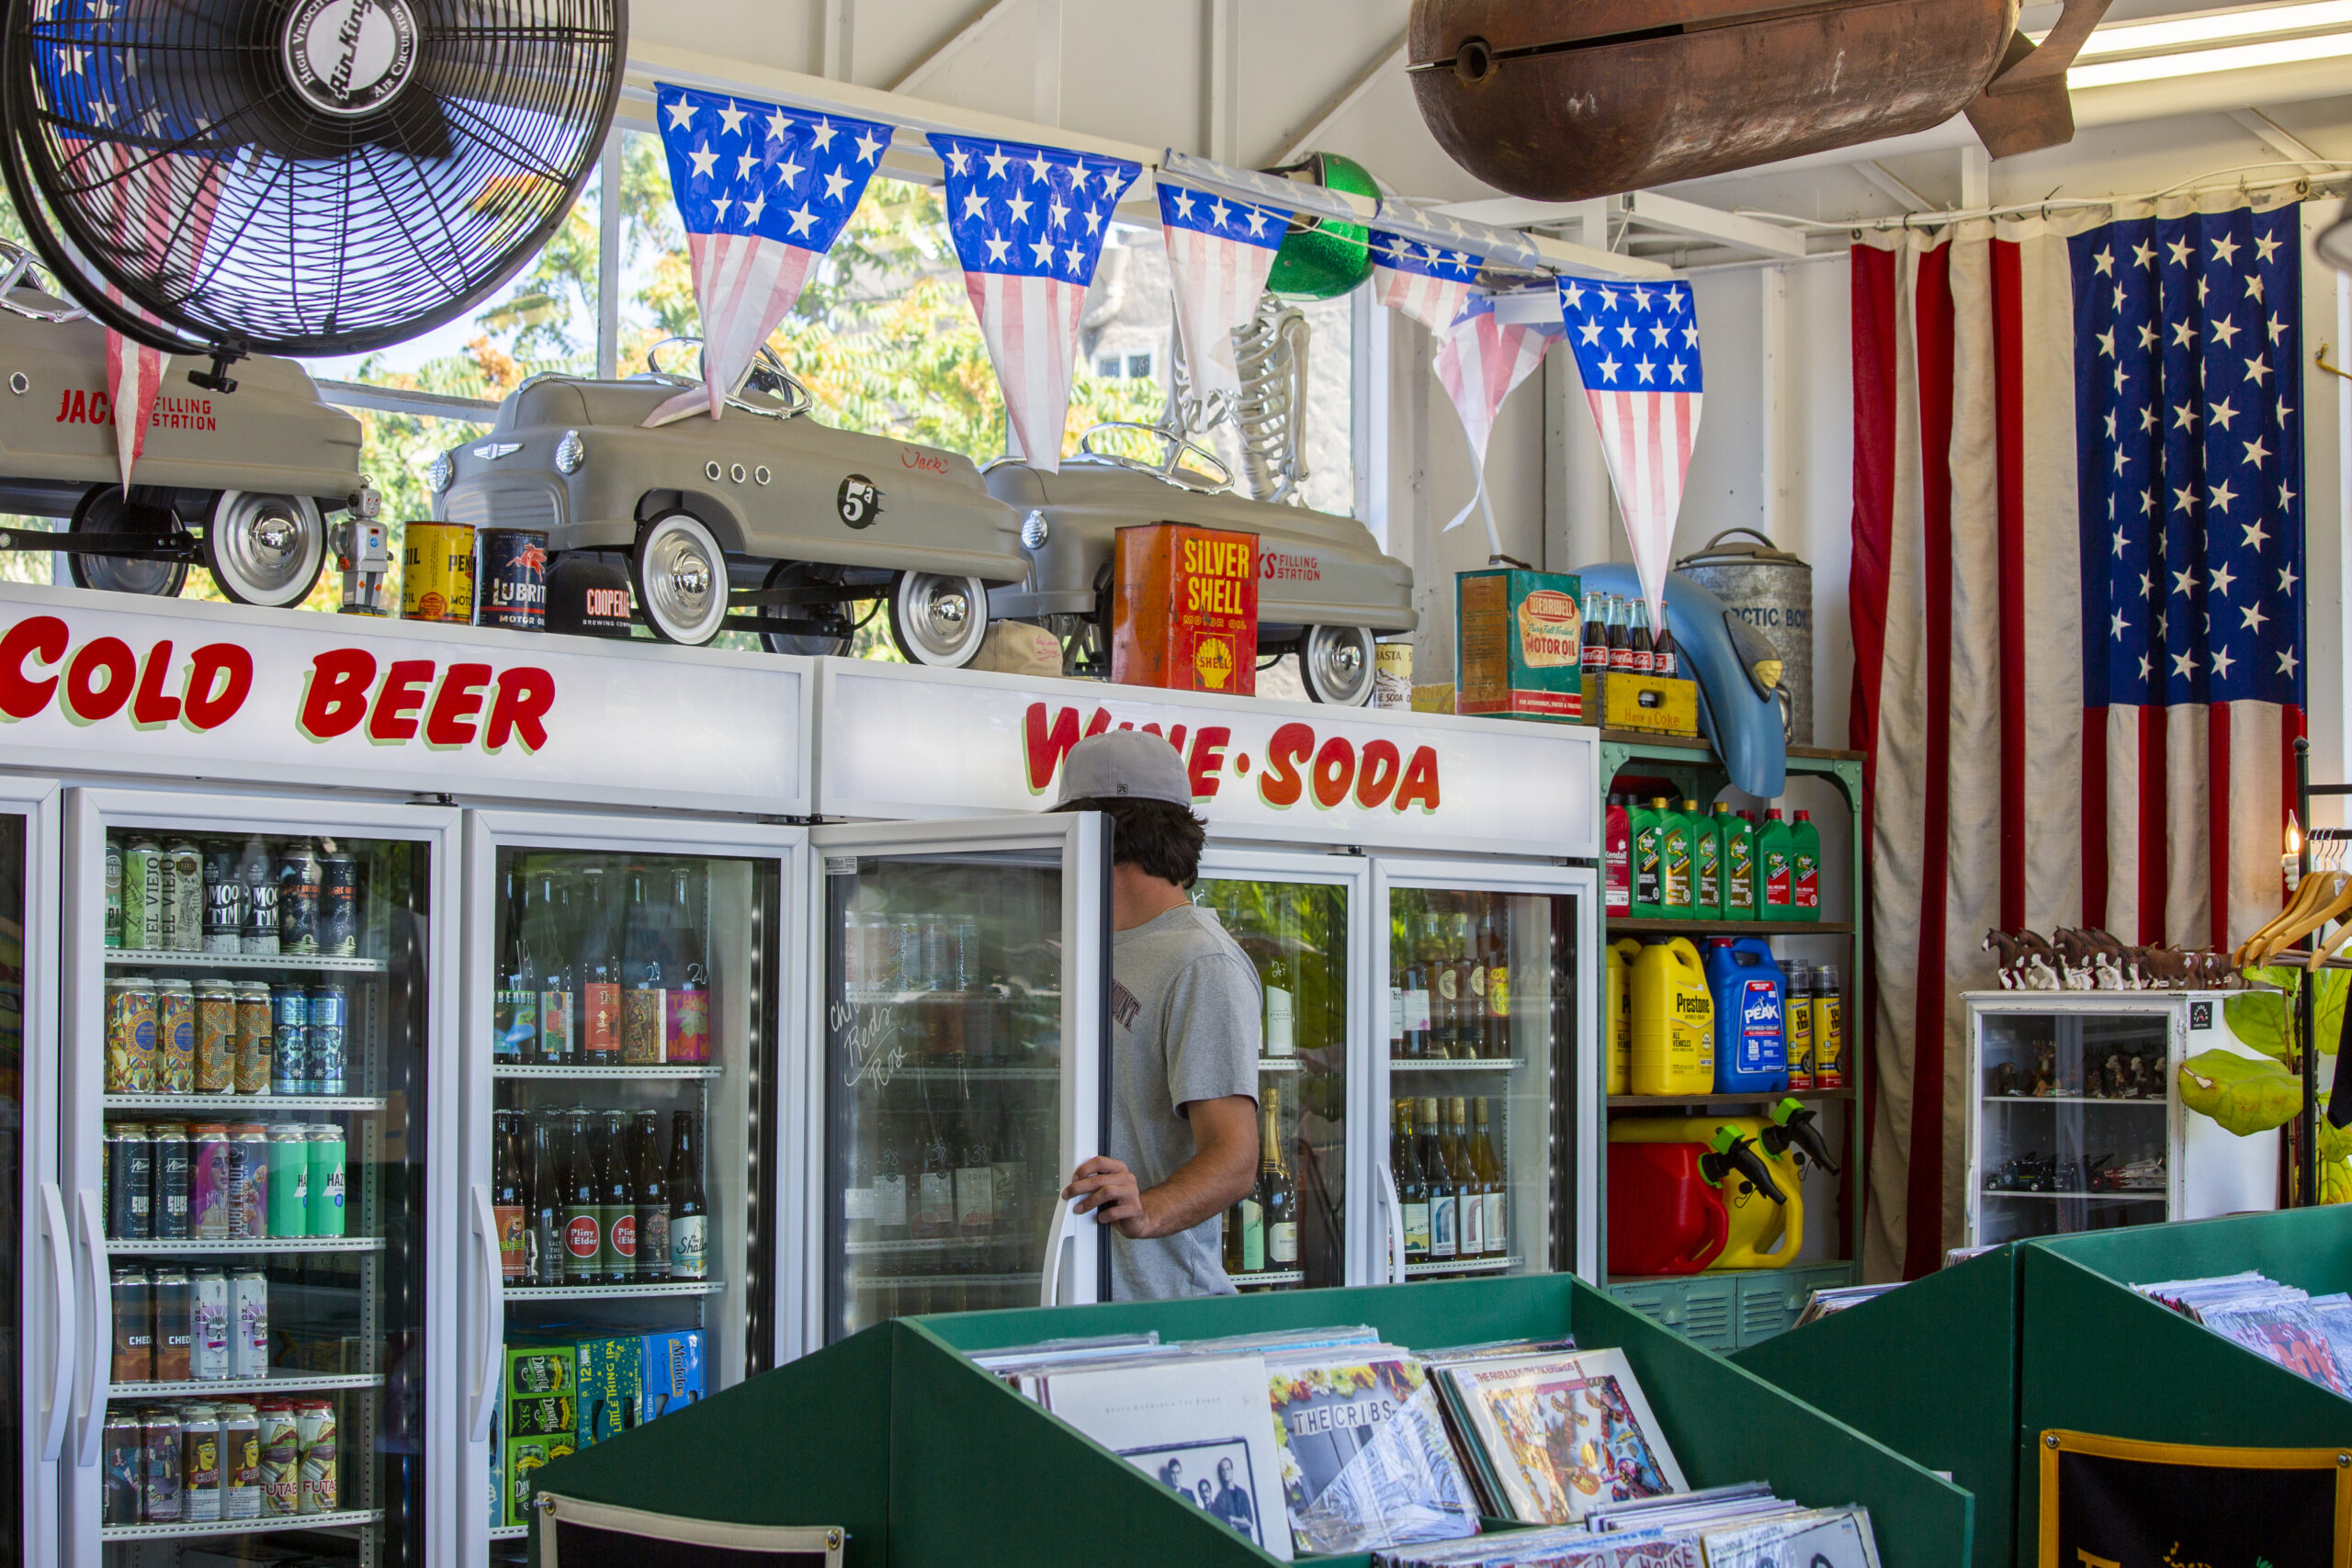 Beer, wine and sodas are staples at Jacks Filling Station on Broadway, which sells gas, vintage vinyl records, and an assortment of sundries. The retro vibe is prominent throughout the building, and there are many small still lives scattered around the store, on Thursday, June 24, 2021.(Photo by Robbi Pengelly)